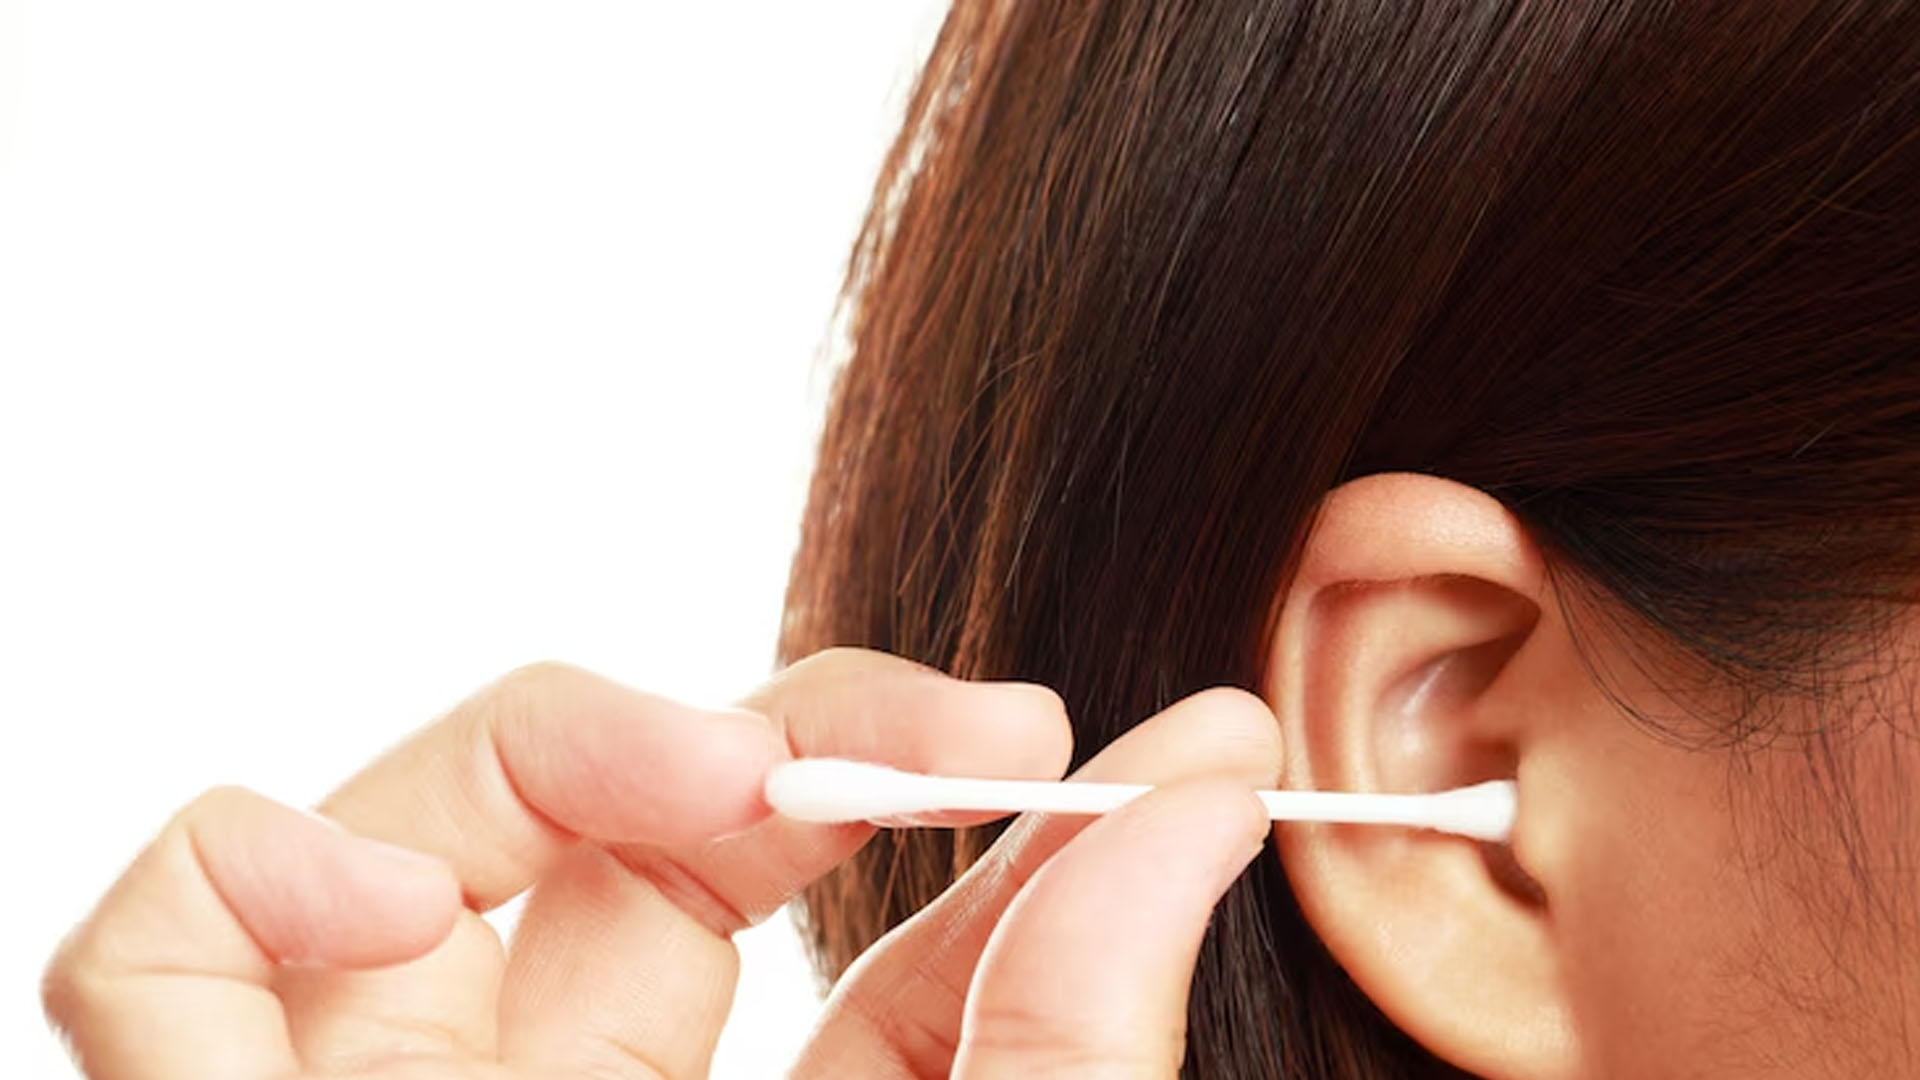 What are the Home Remedies to Clean Ear Wax?